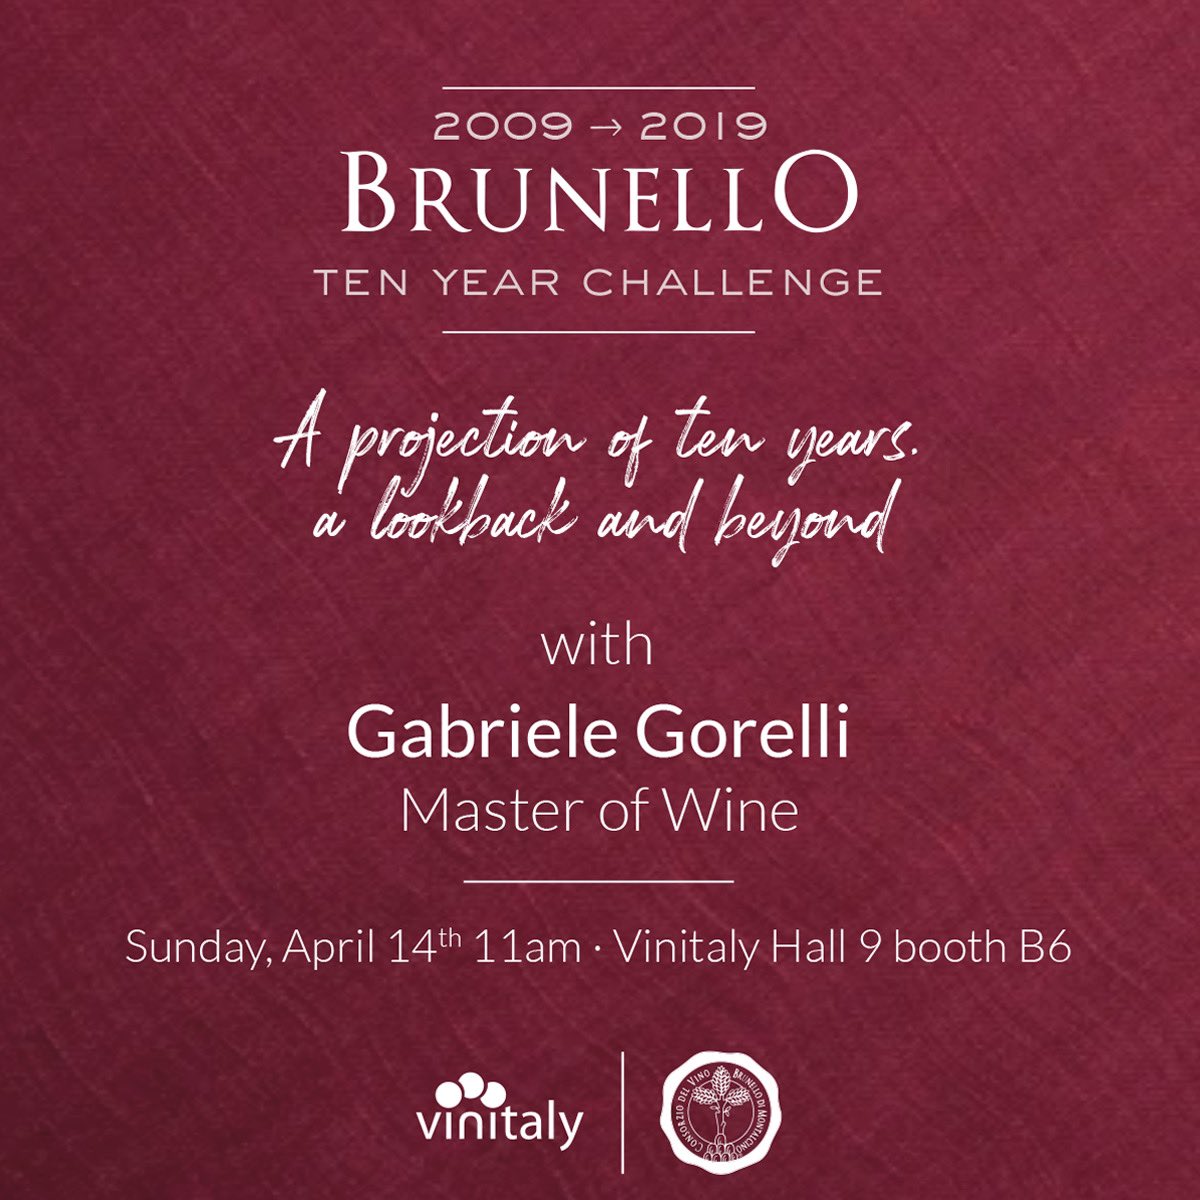 The second edition of the “Ten Year Challenge” 2009-2019 hosted by @gabrielegorelli at @VinitalyTasting “A projection of ten years, a look back and beyond” #vinitaly #brunellodimontalcino